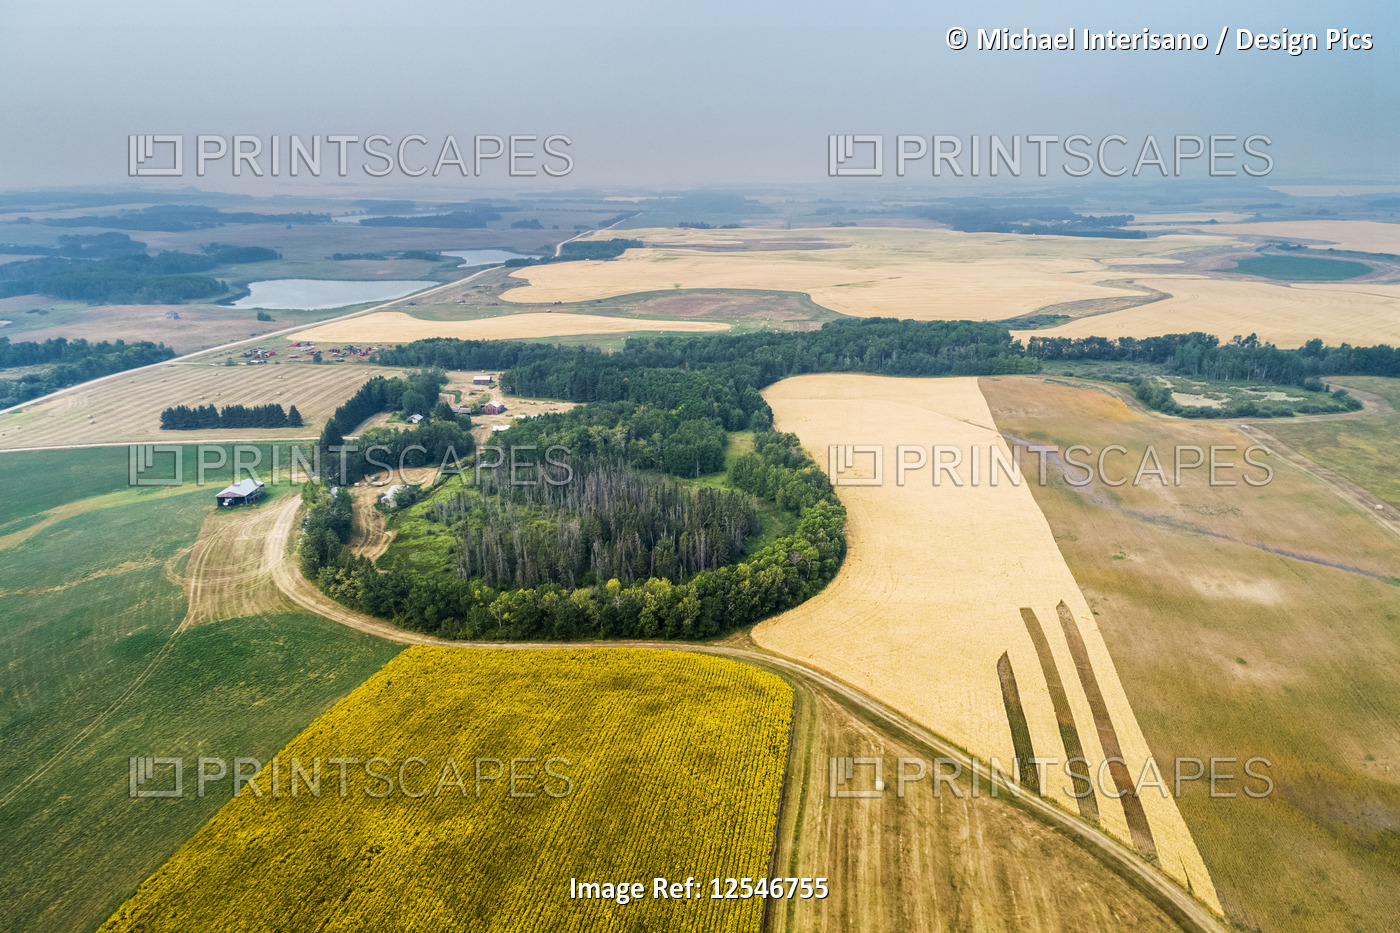 Aerial view of a patch work of different crops in a field, including sunflowers ...